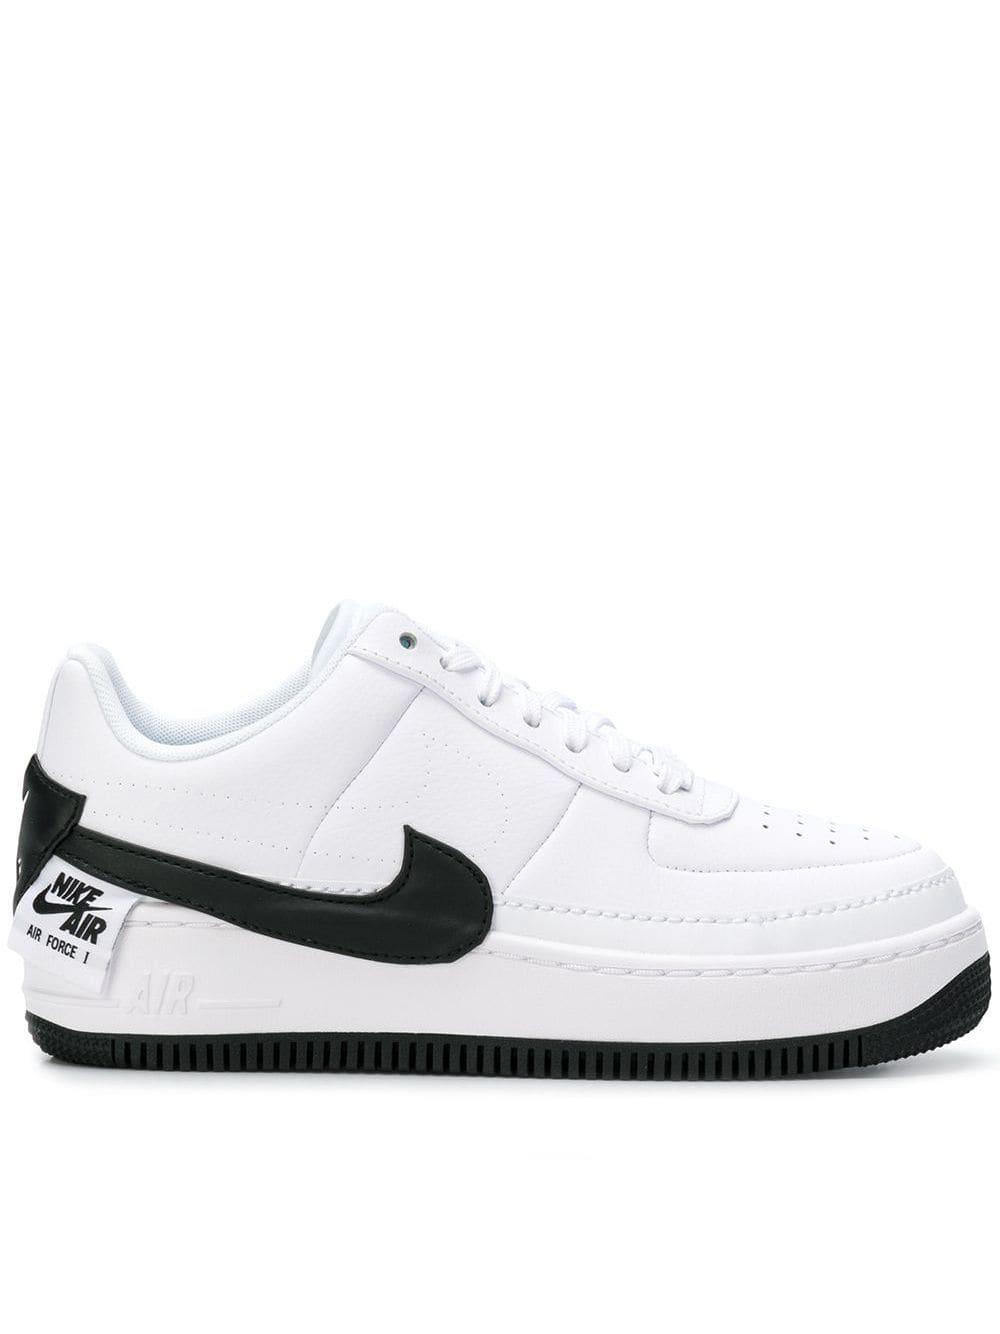 nike air force 1 jester black and green